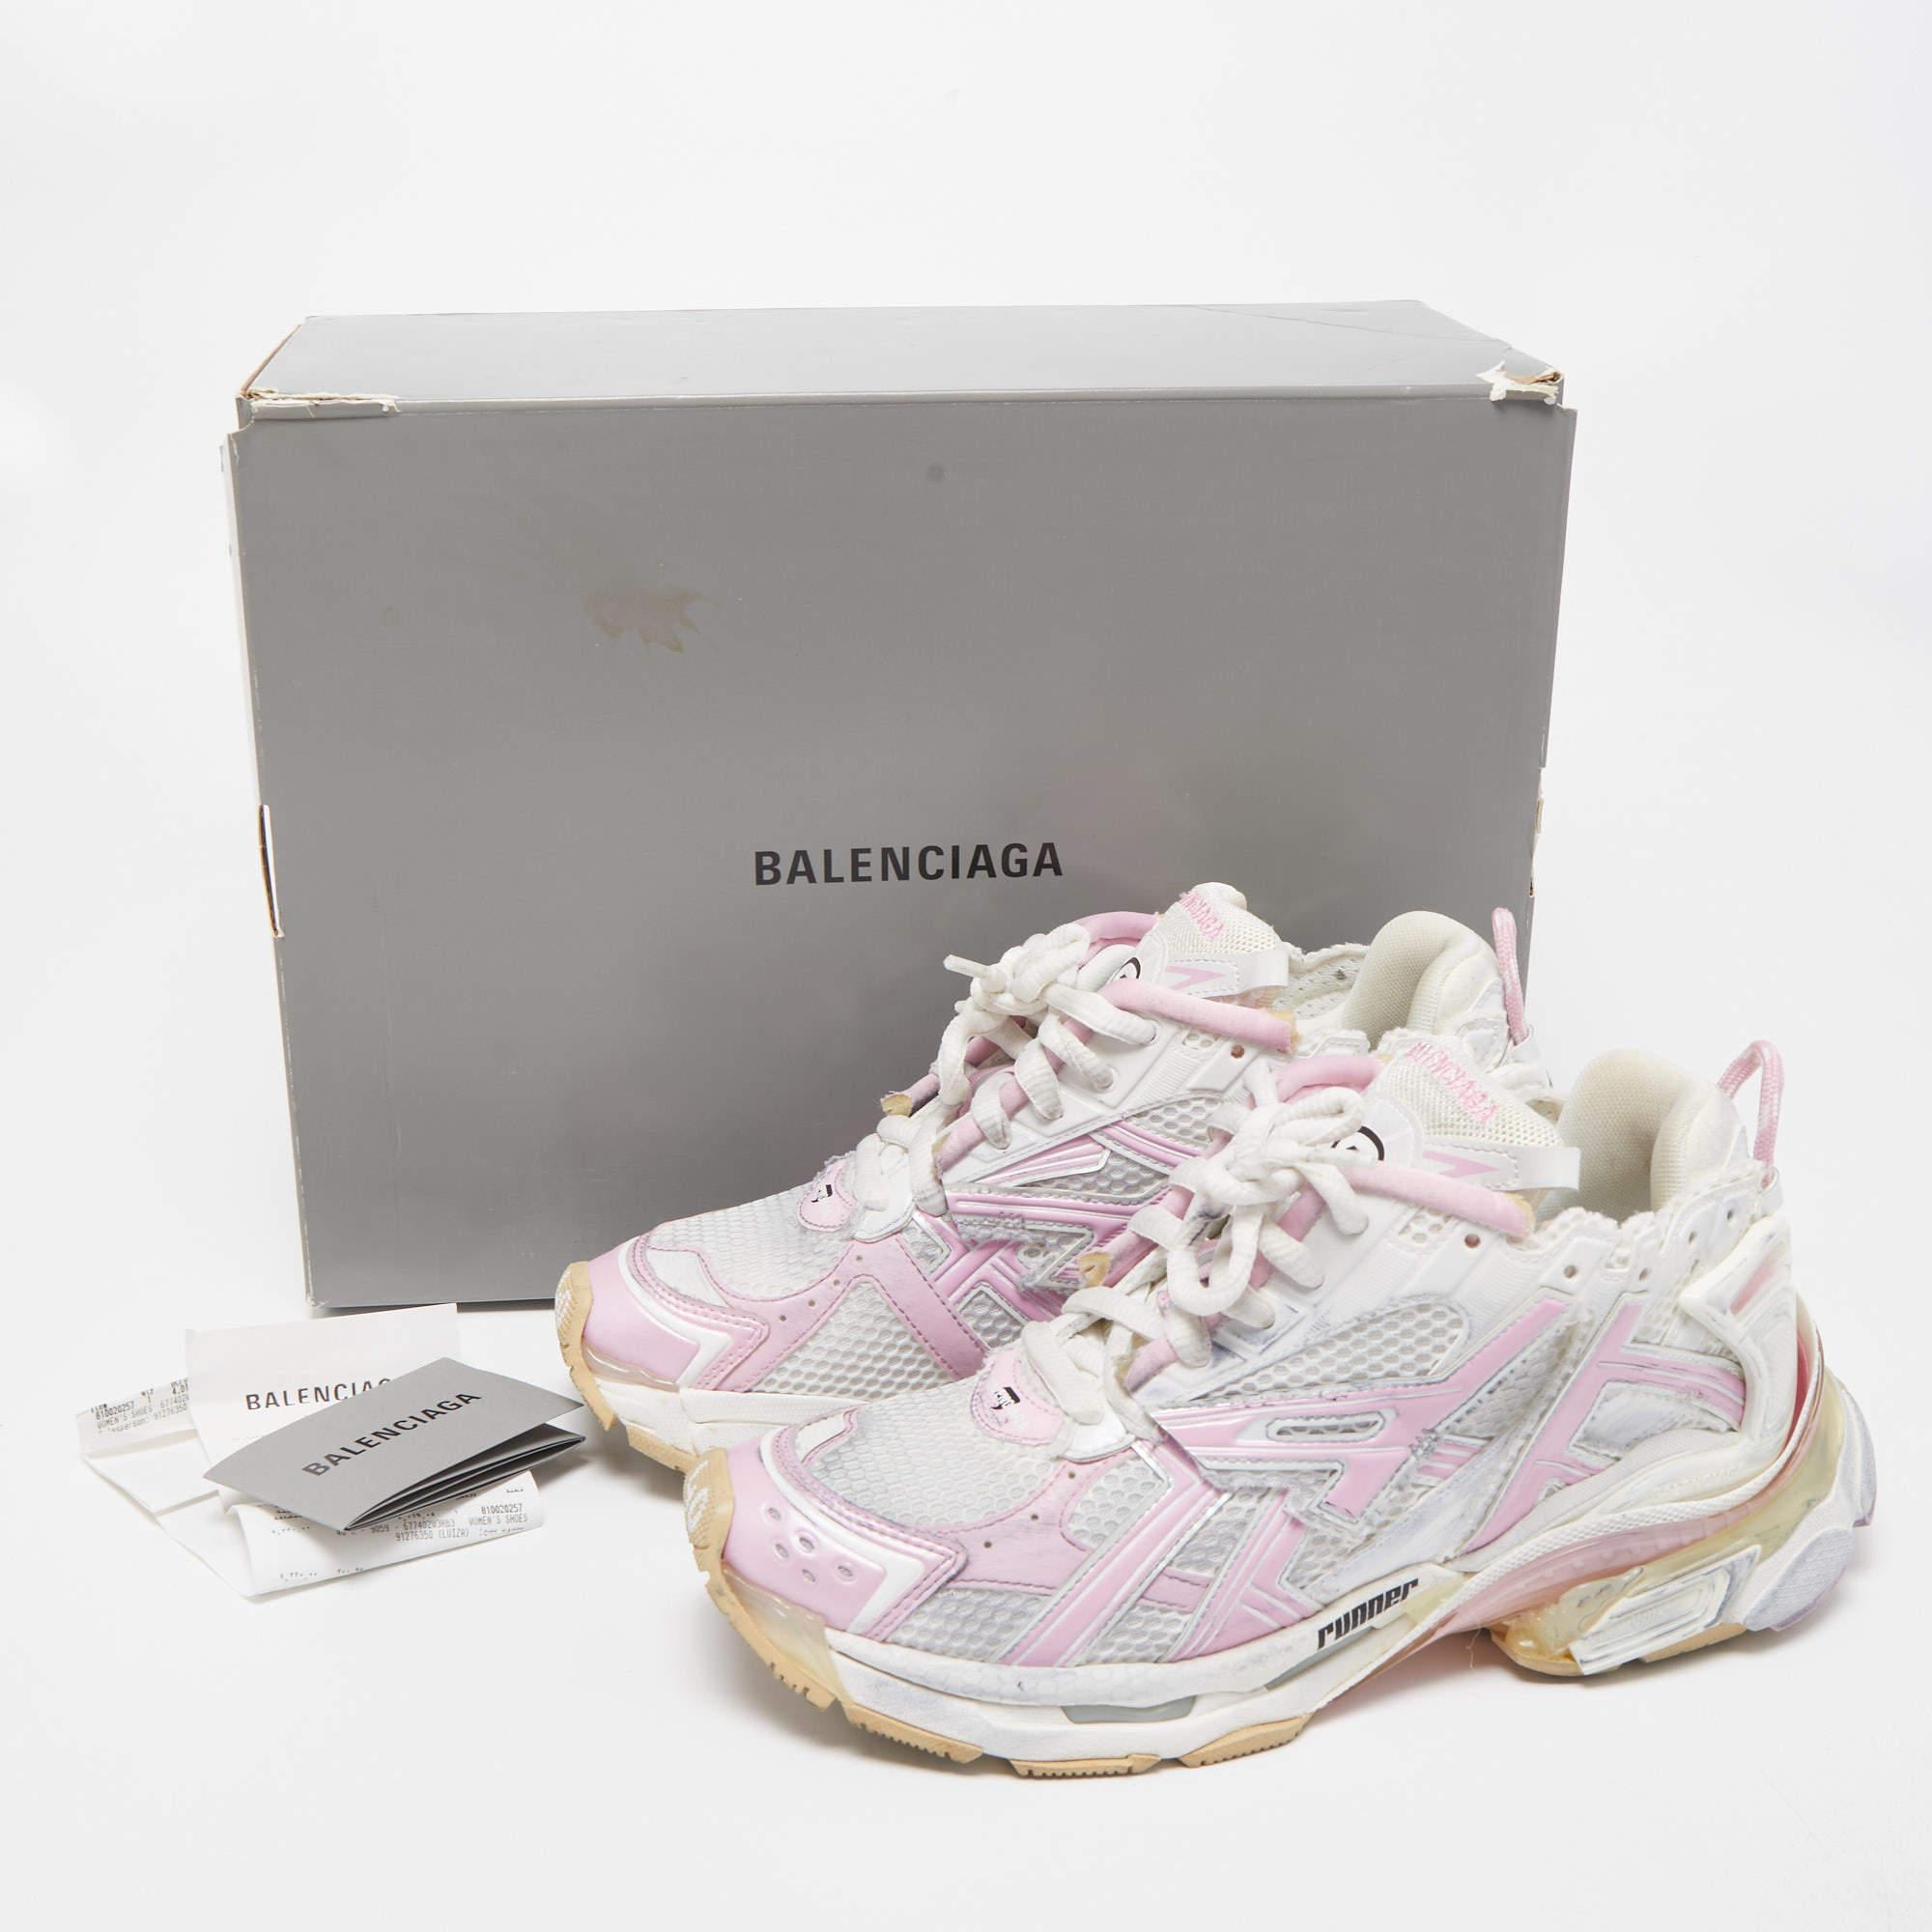 Balenciaga White/Pink Fabric and Leather Runner Sneakers Size 40 2